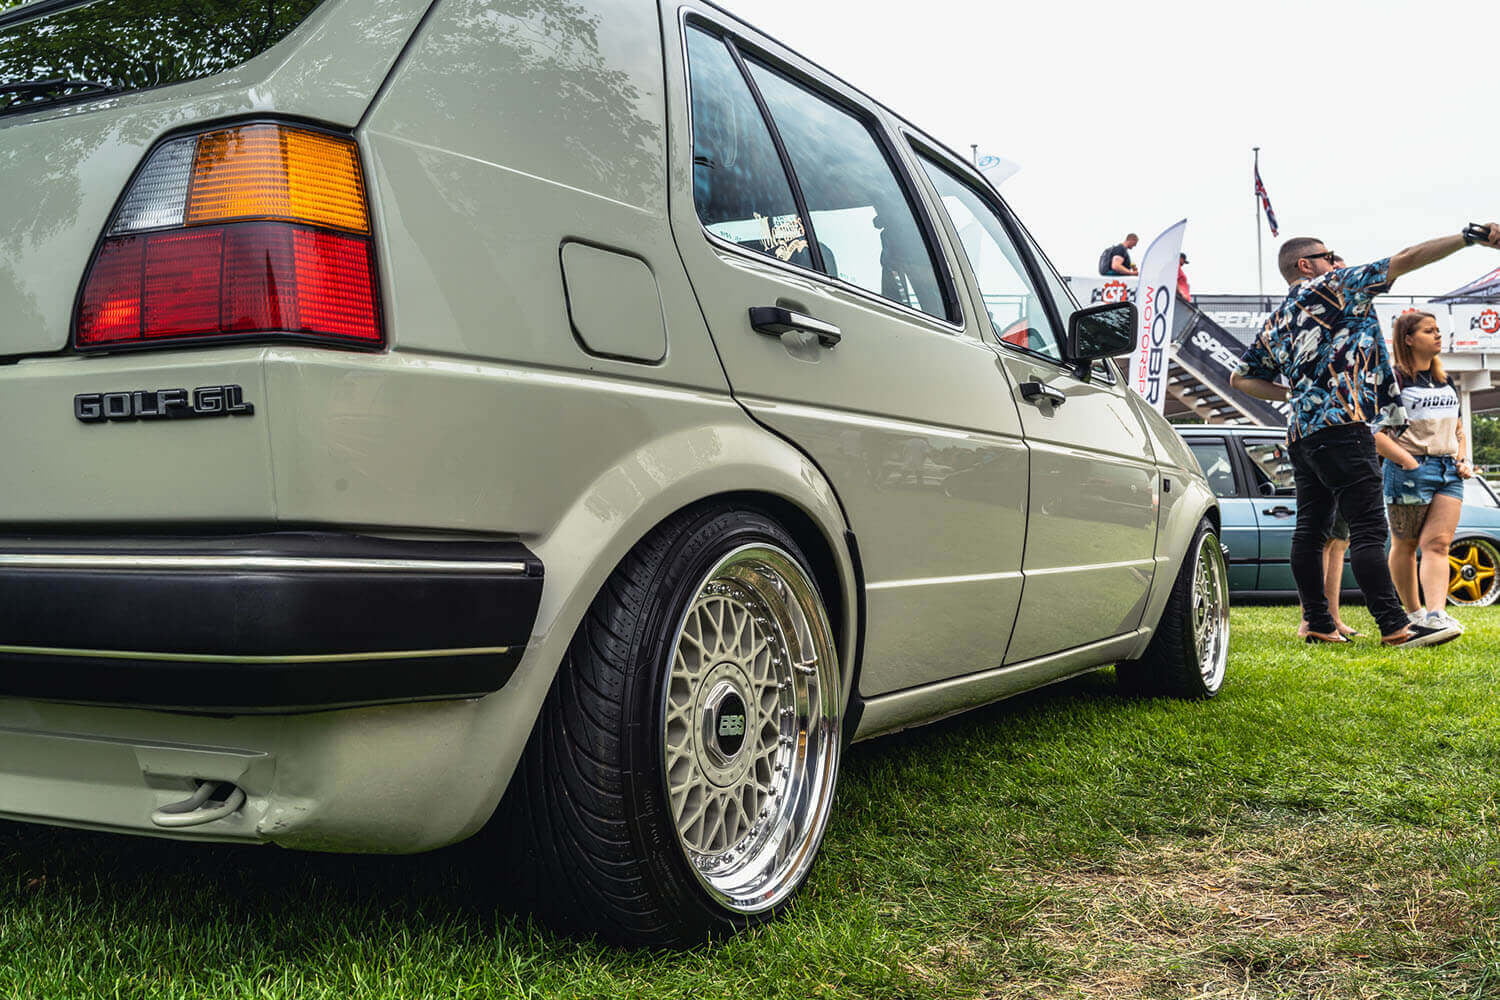 VW Golf: Your Tuning Guide